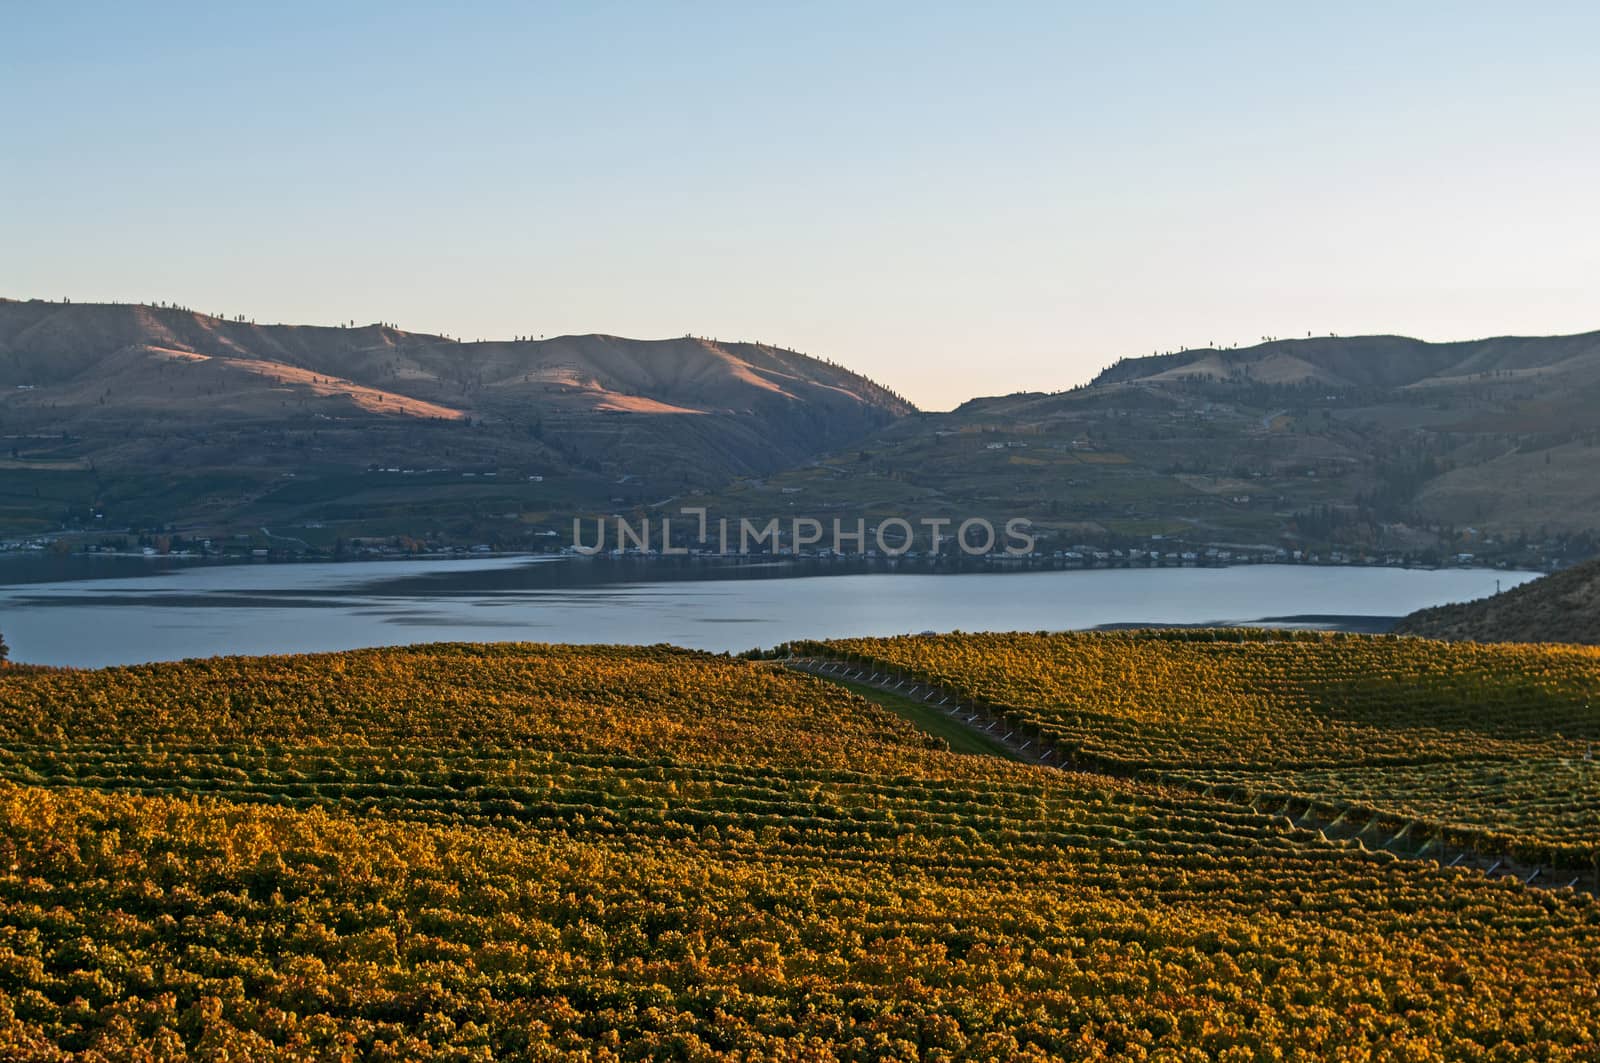 A view of the Benson vineyard at sunset